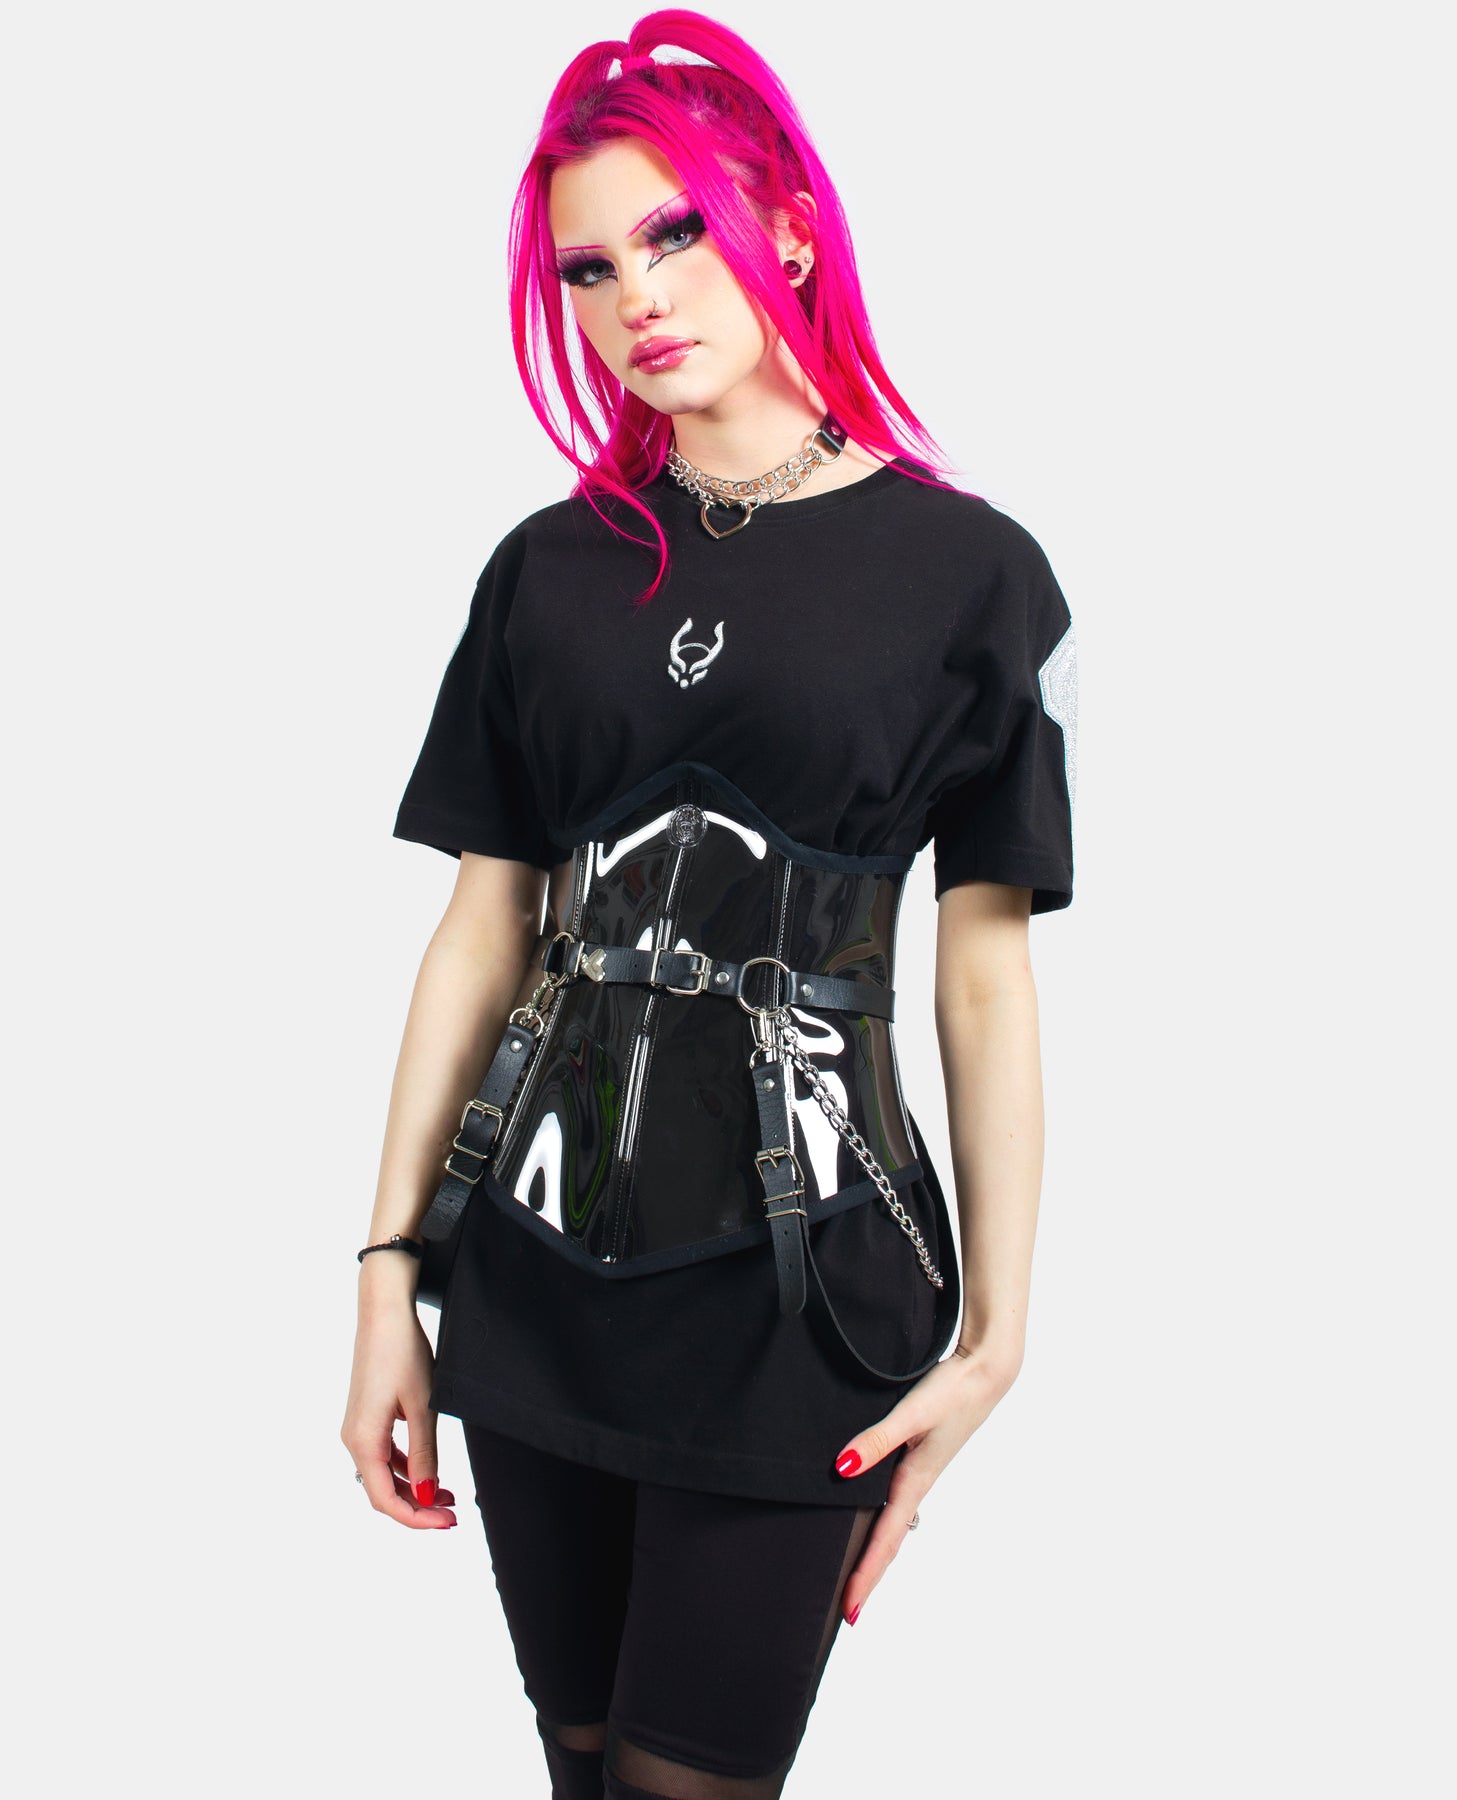 Women's New / Hot Clothing by Cyberdog - Rave clothing, festival ...